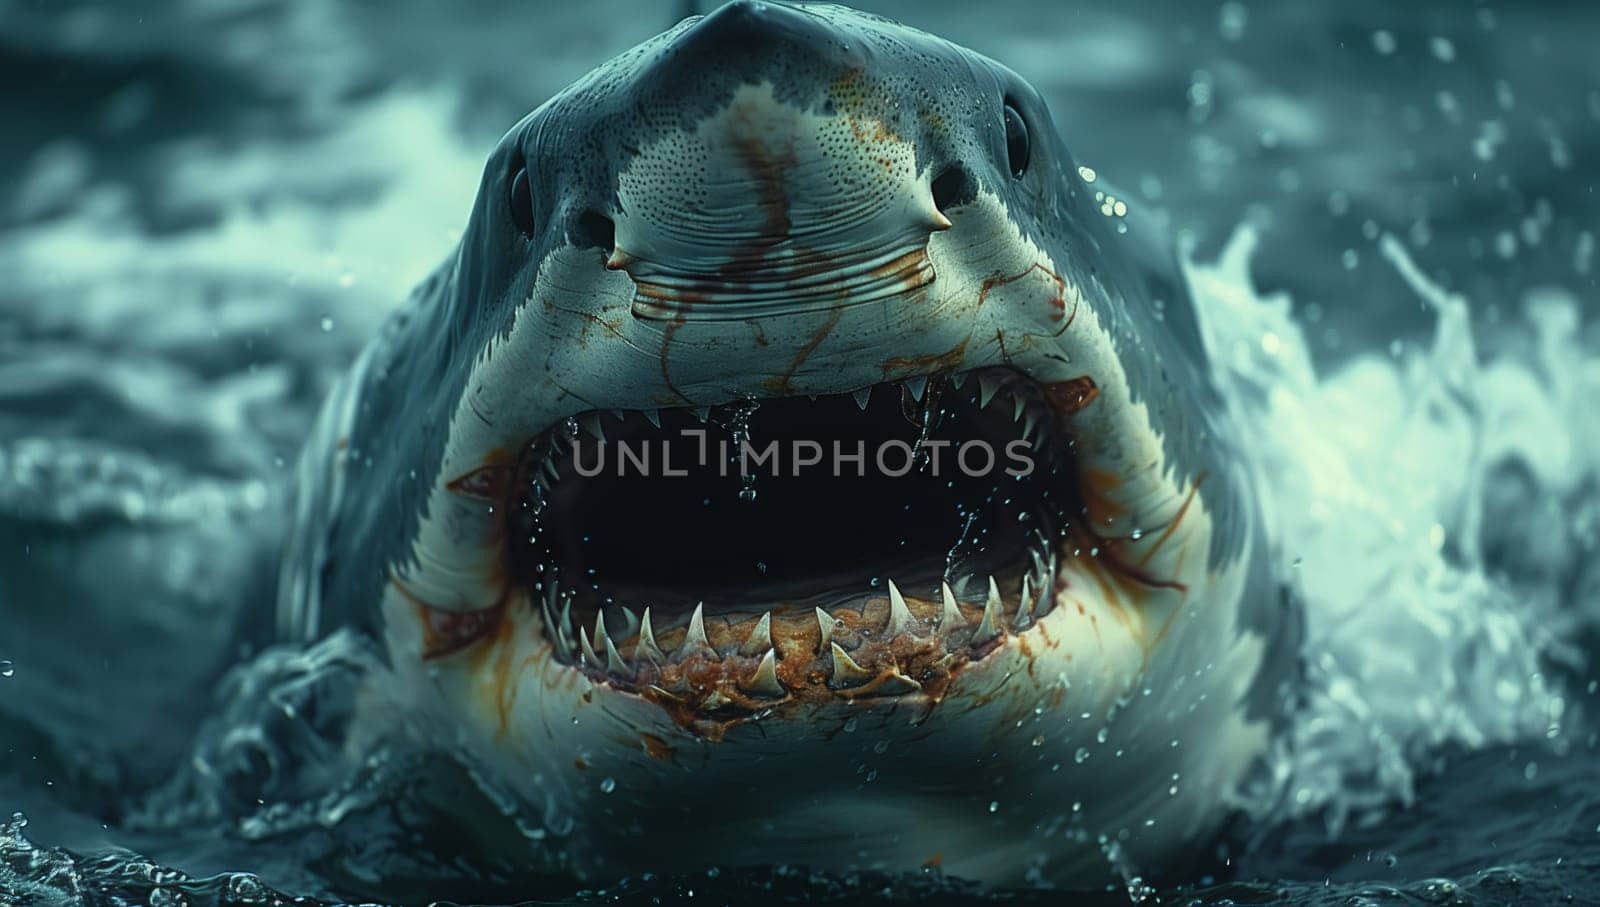 A Lamniformes shark swims in the ocean, showcasing its fangs and fluid motion by richwolf